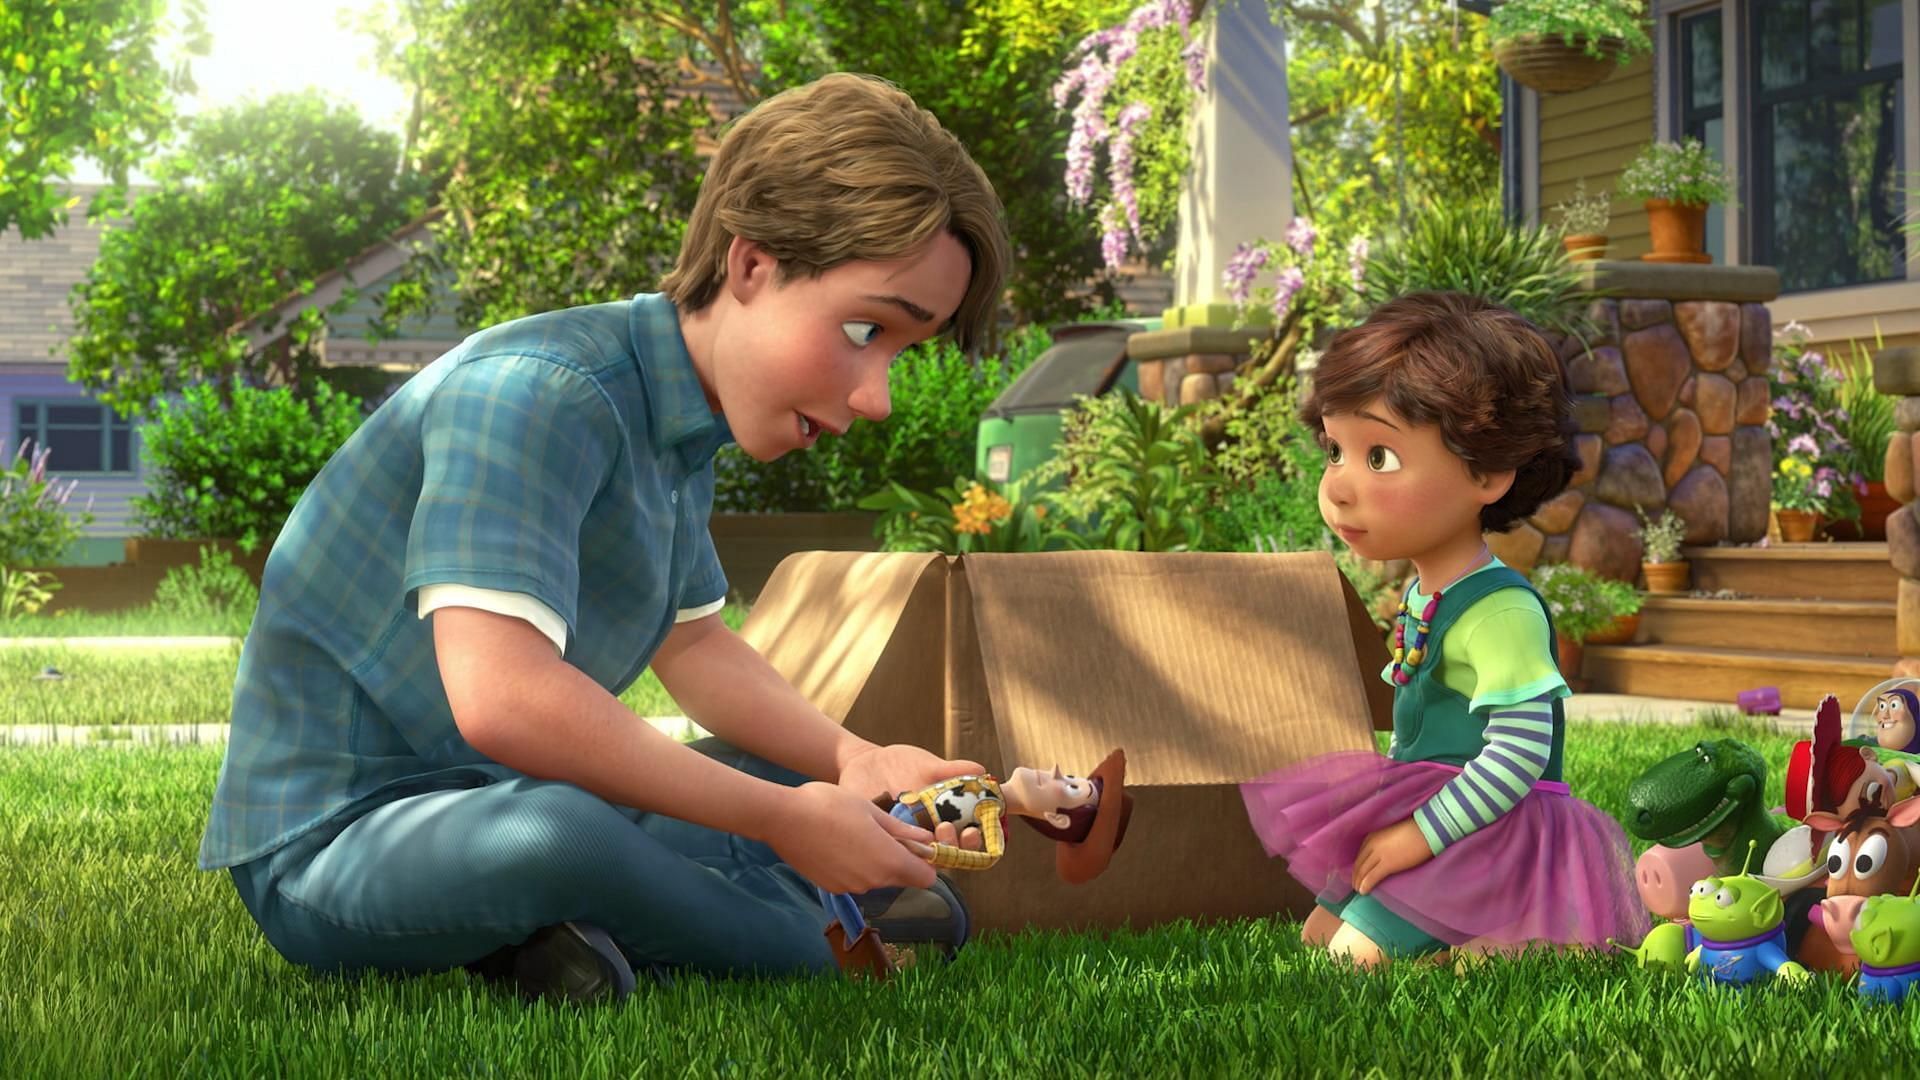 Andy giving away his toys to Bonnie (Image via Disney)